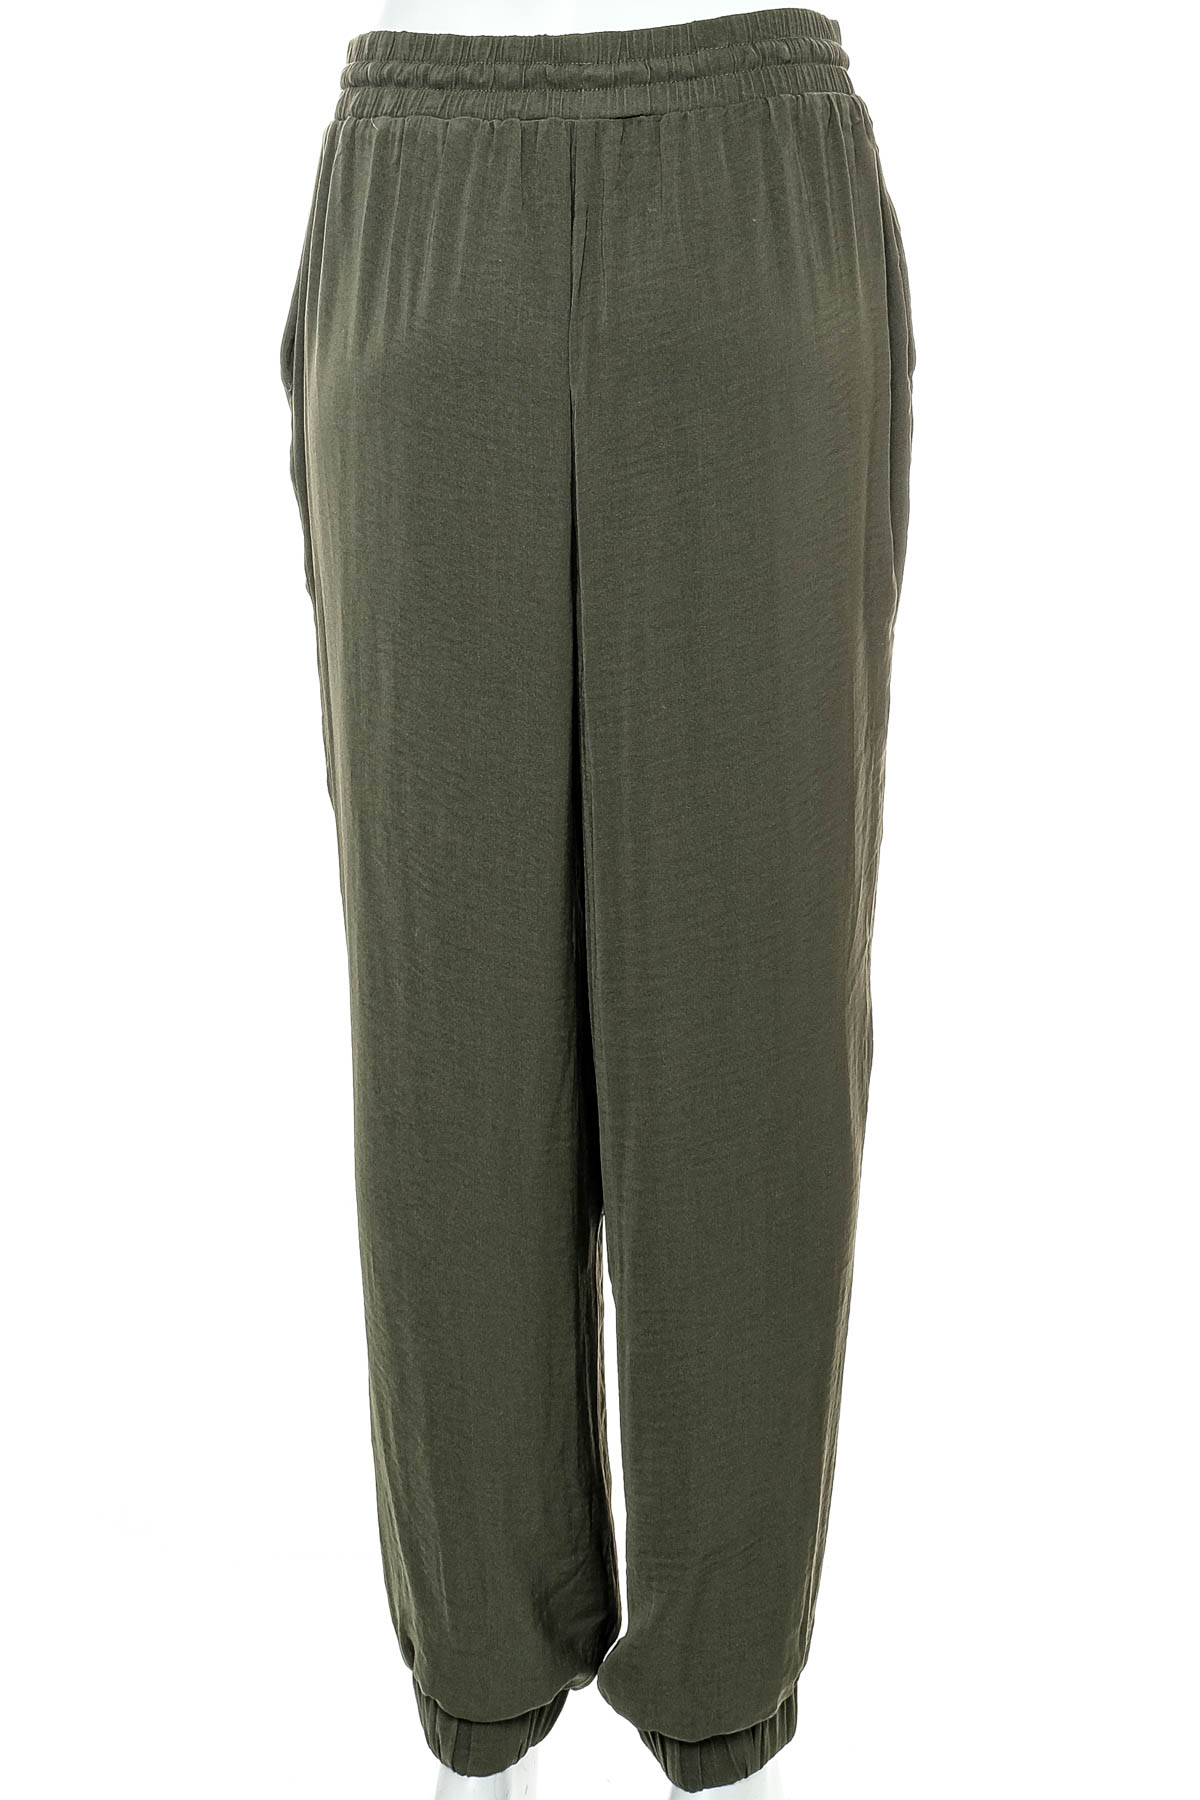 Women's trousers - ABOUT YOU - 1